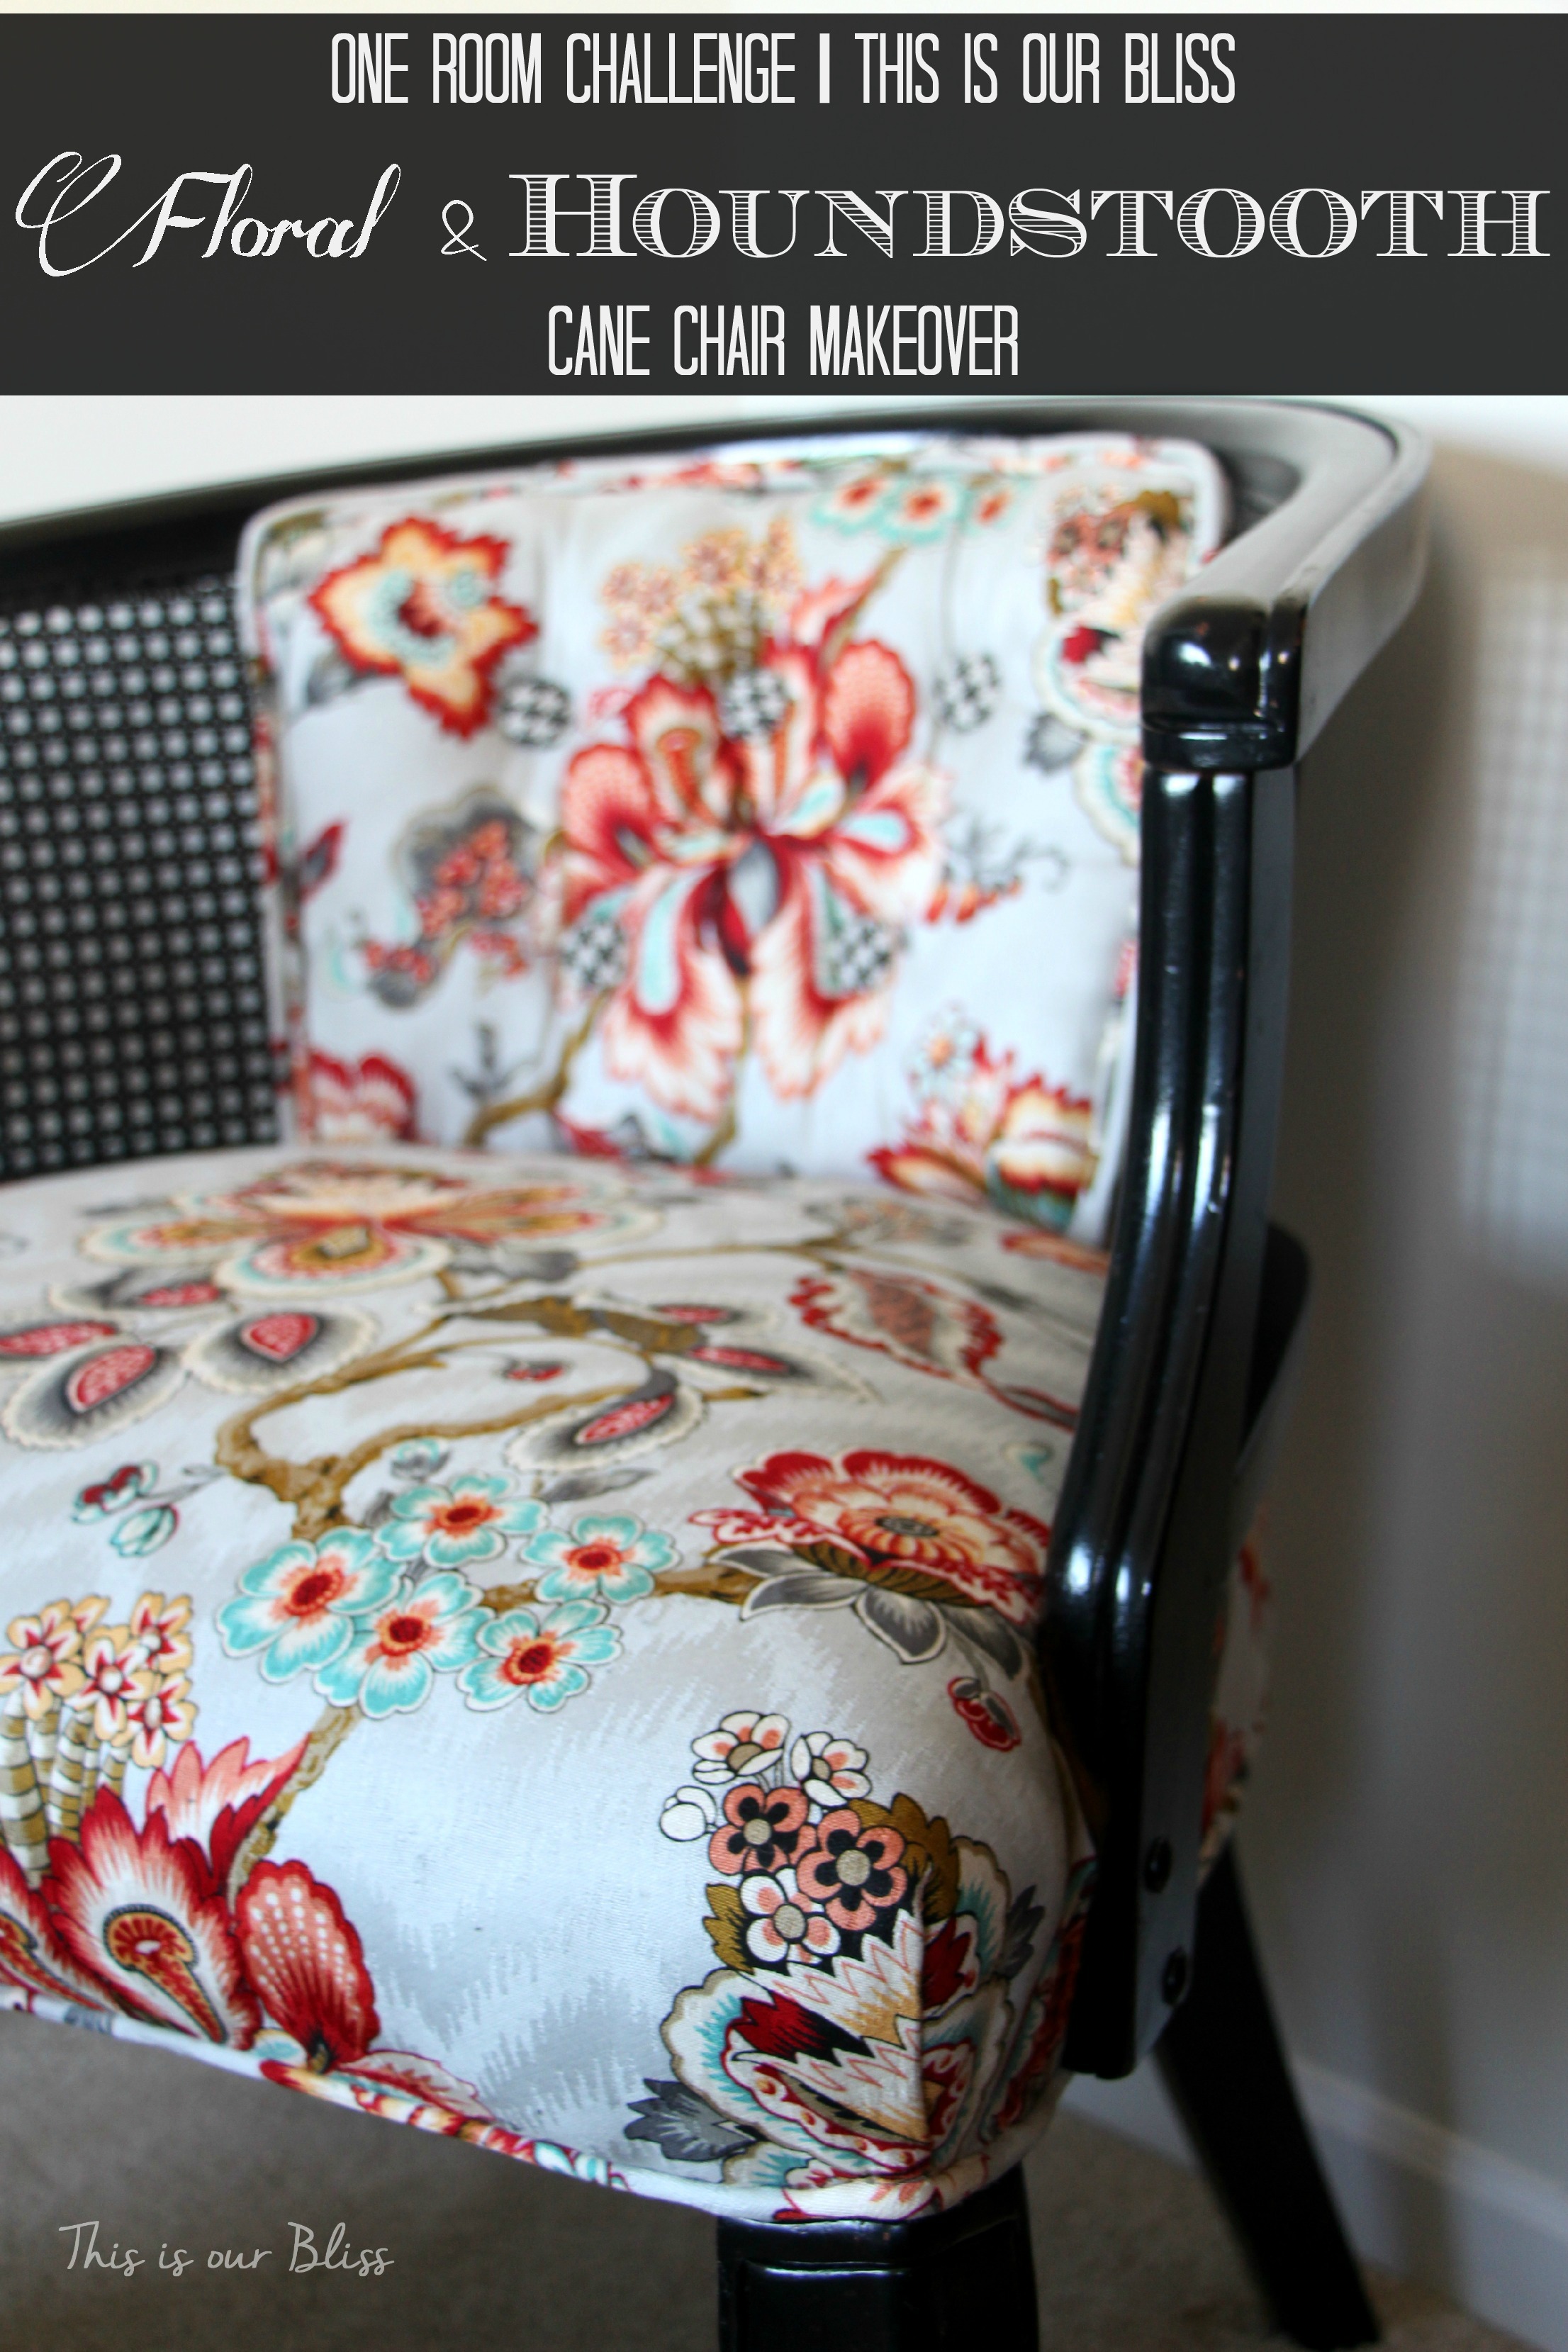 floral and houndstooth cane chair makeover - HGTV fabric - This is our Bliss 4